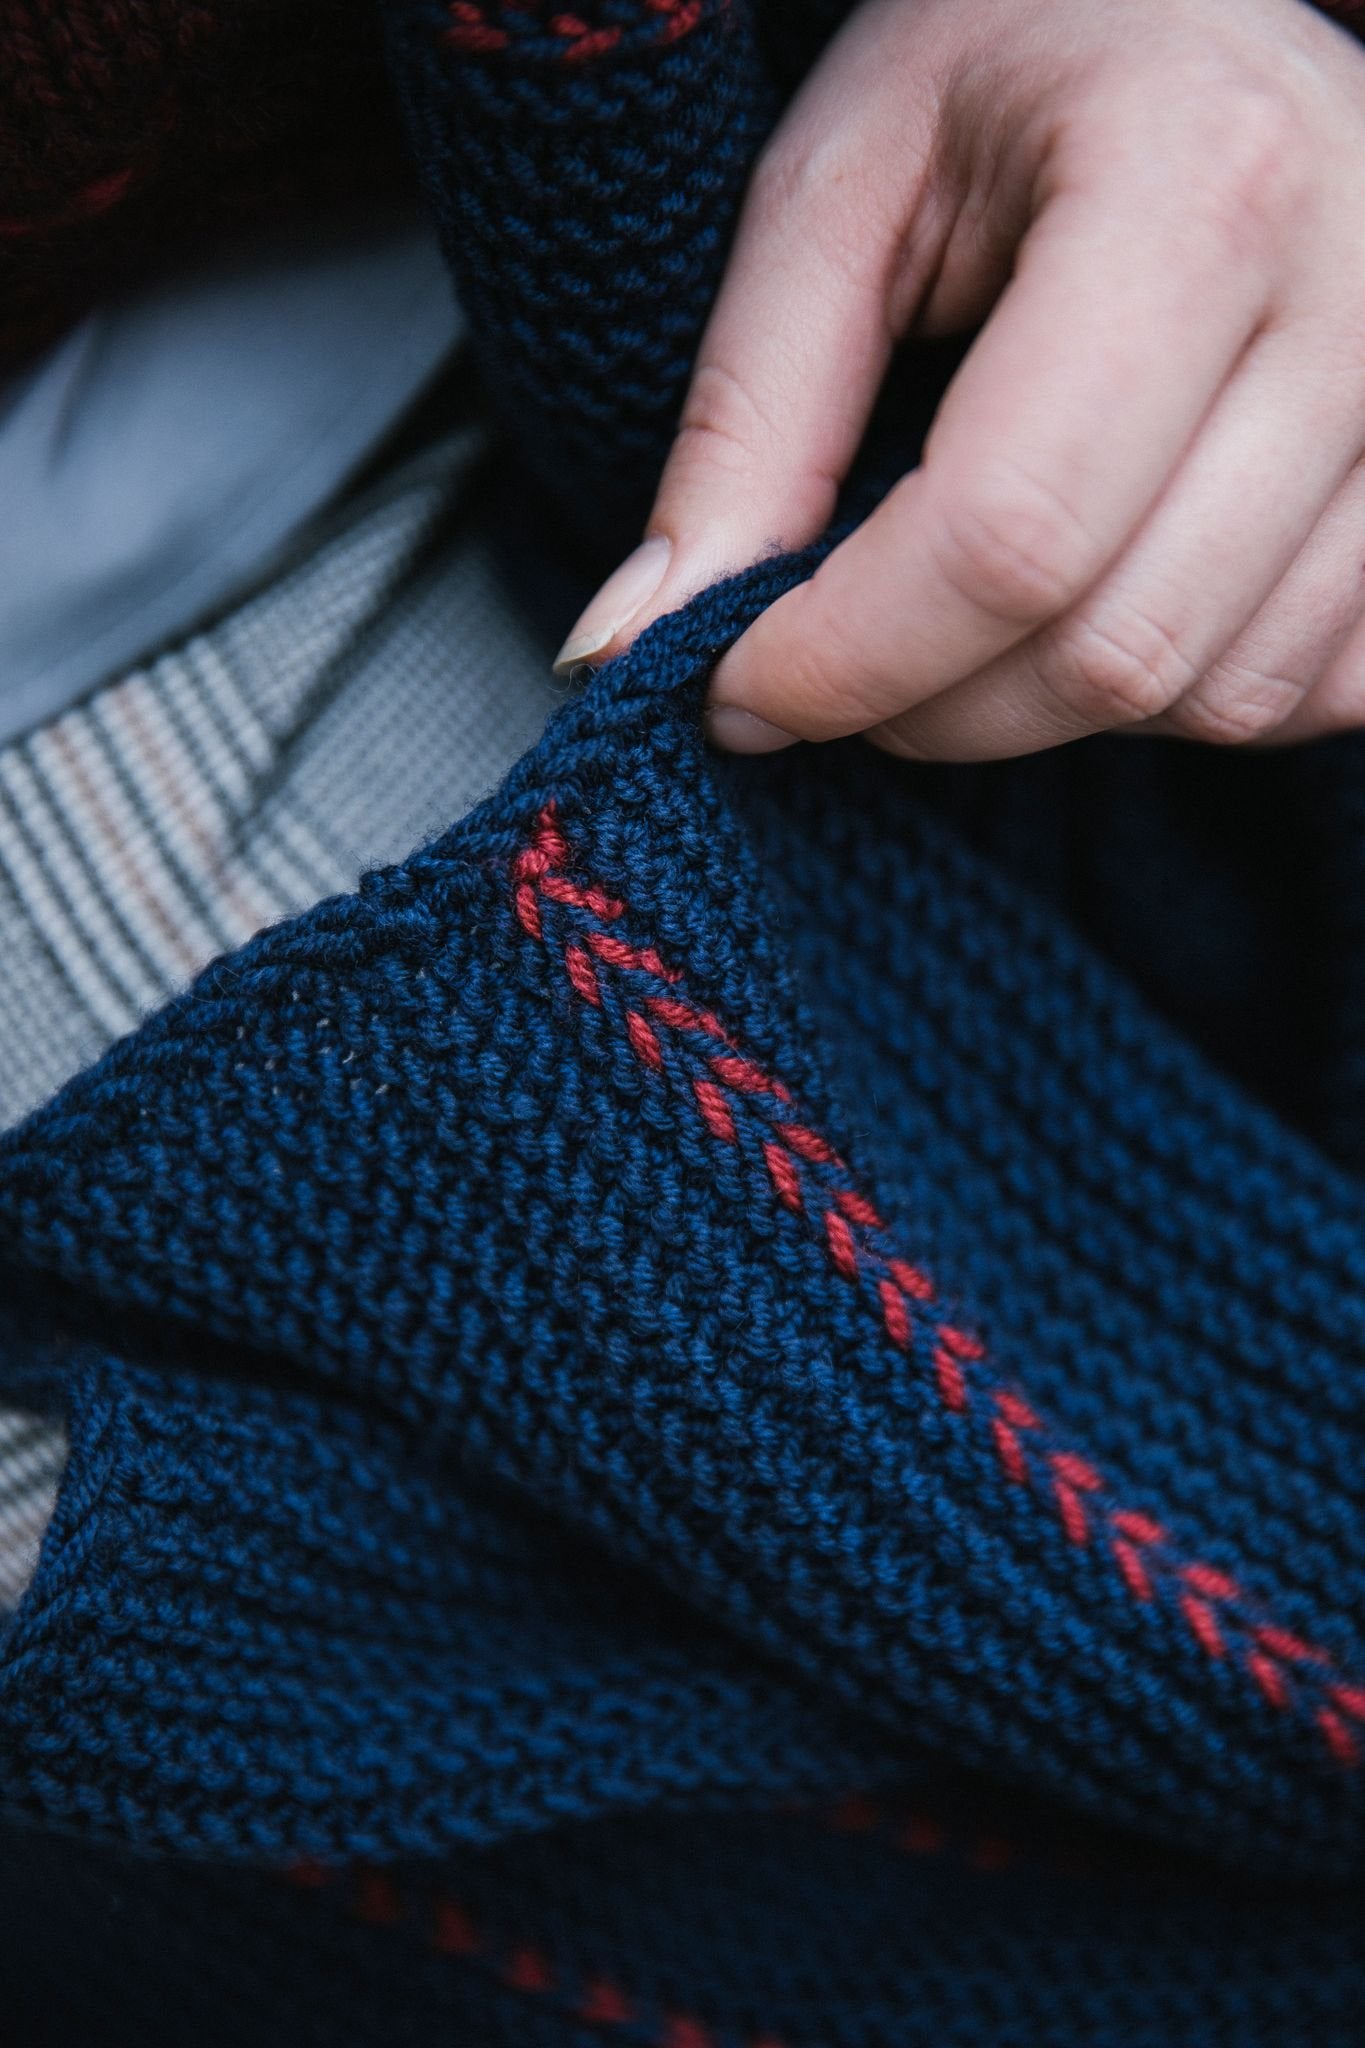 Traditions Revisited: Modern Estonian Knits by Aleks Byrd